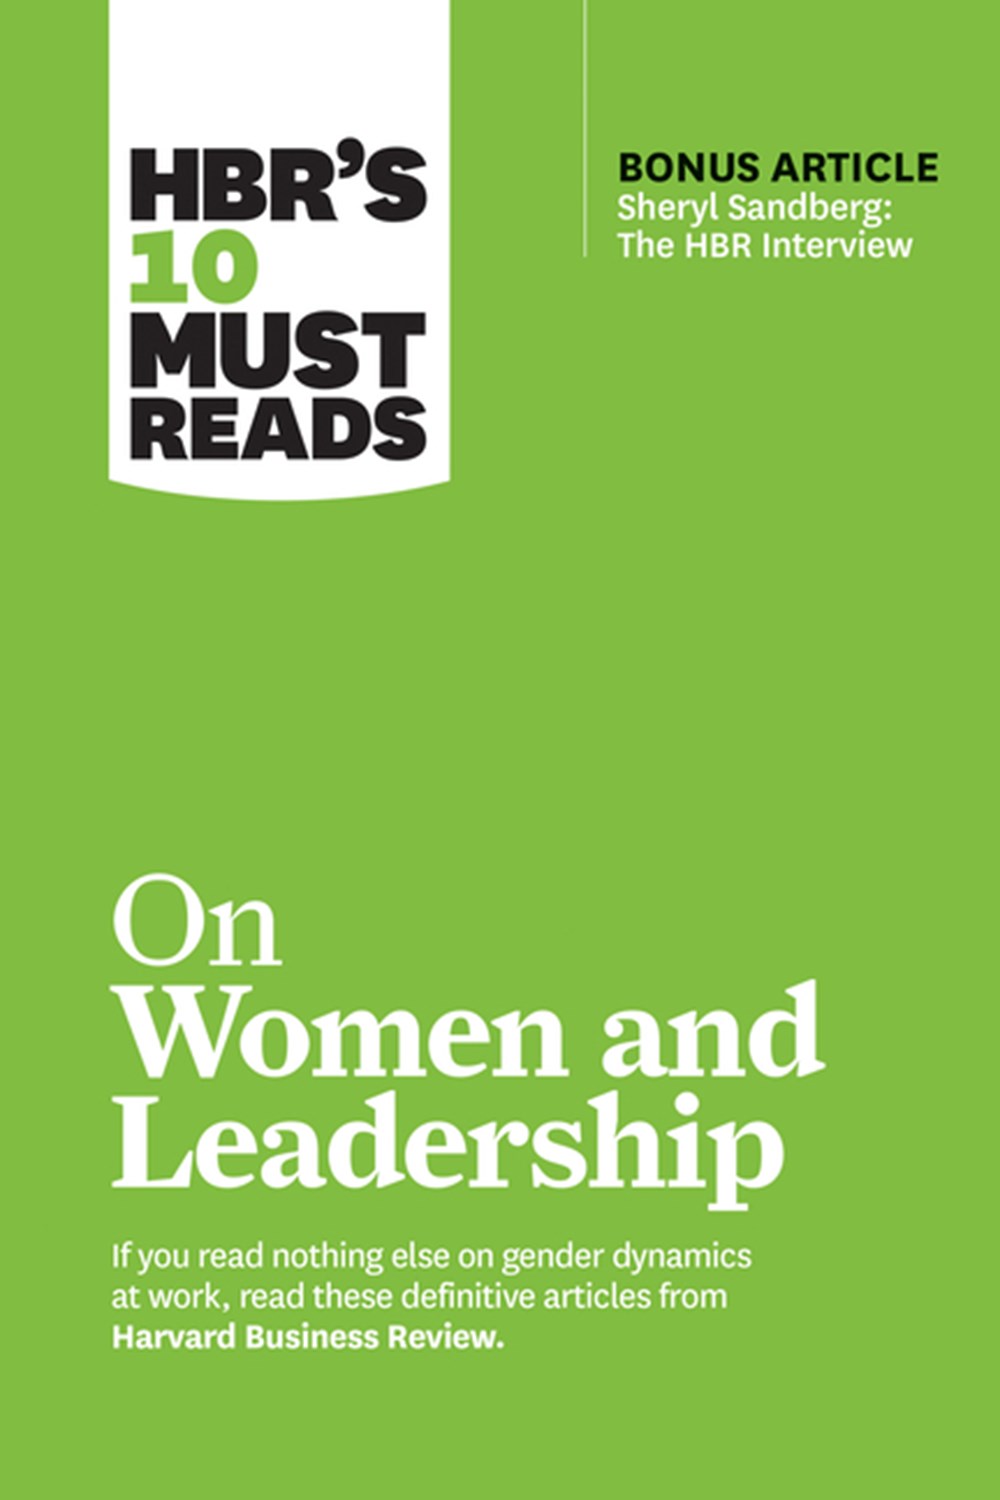 Hbr's 10 Must Reads on Women and Leadership (with Bonus Article "sheryl Sandberg The HBR Interview")